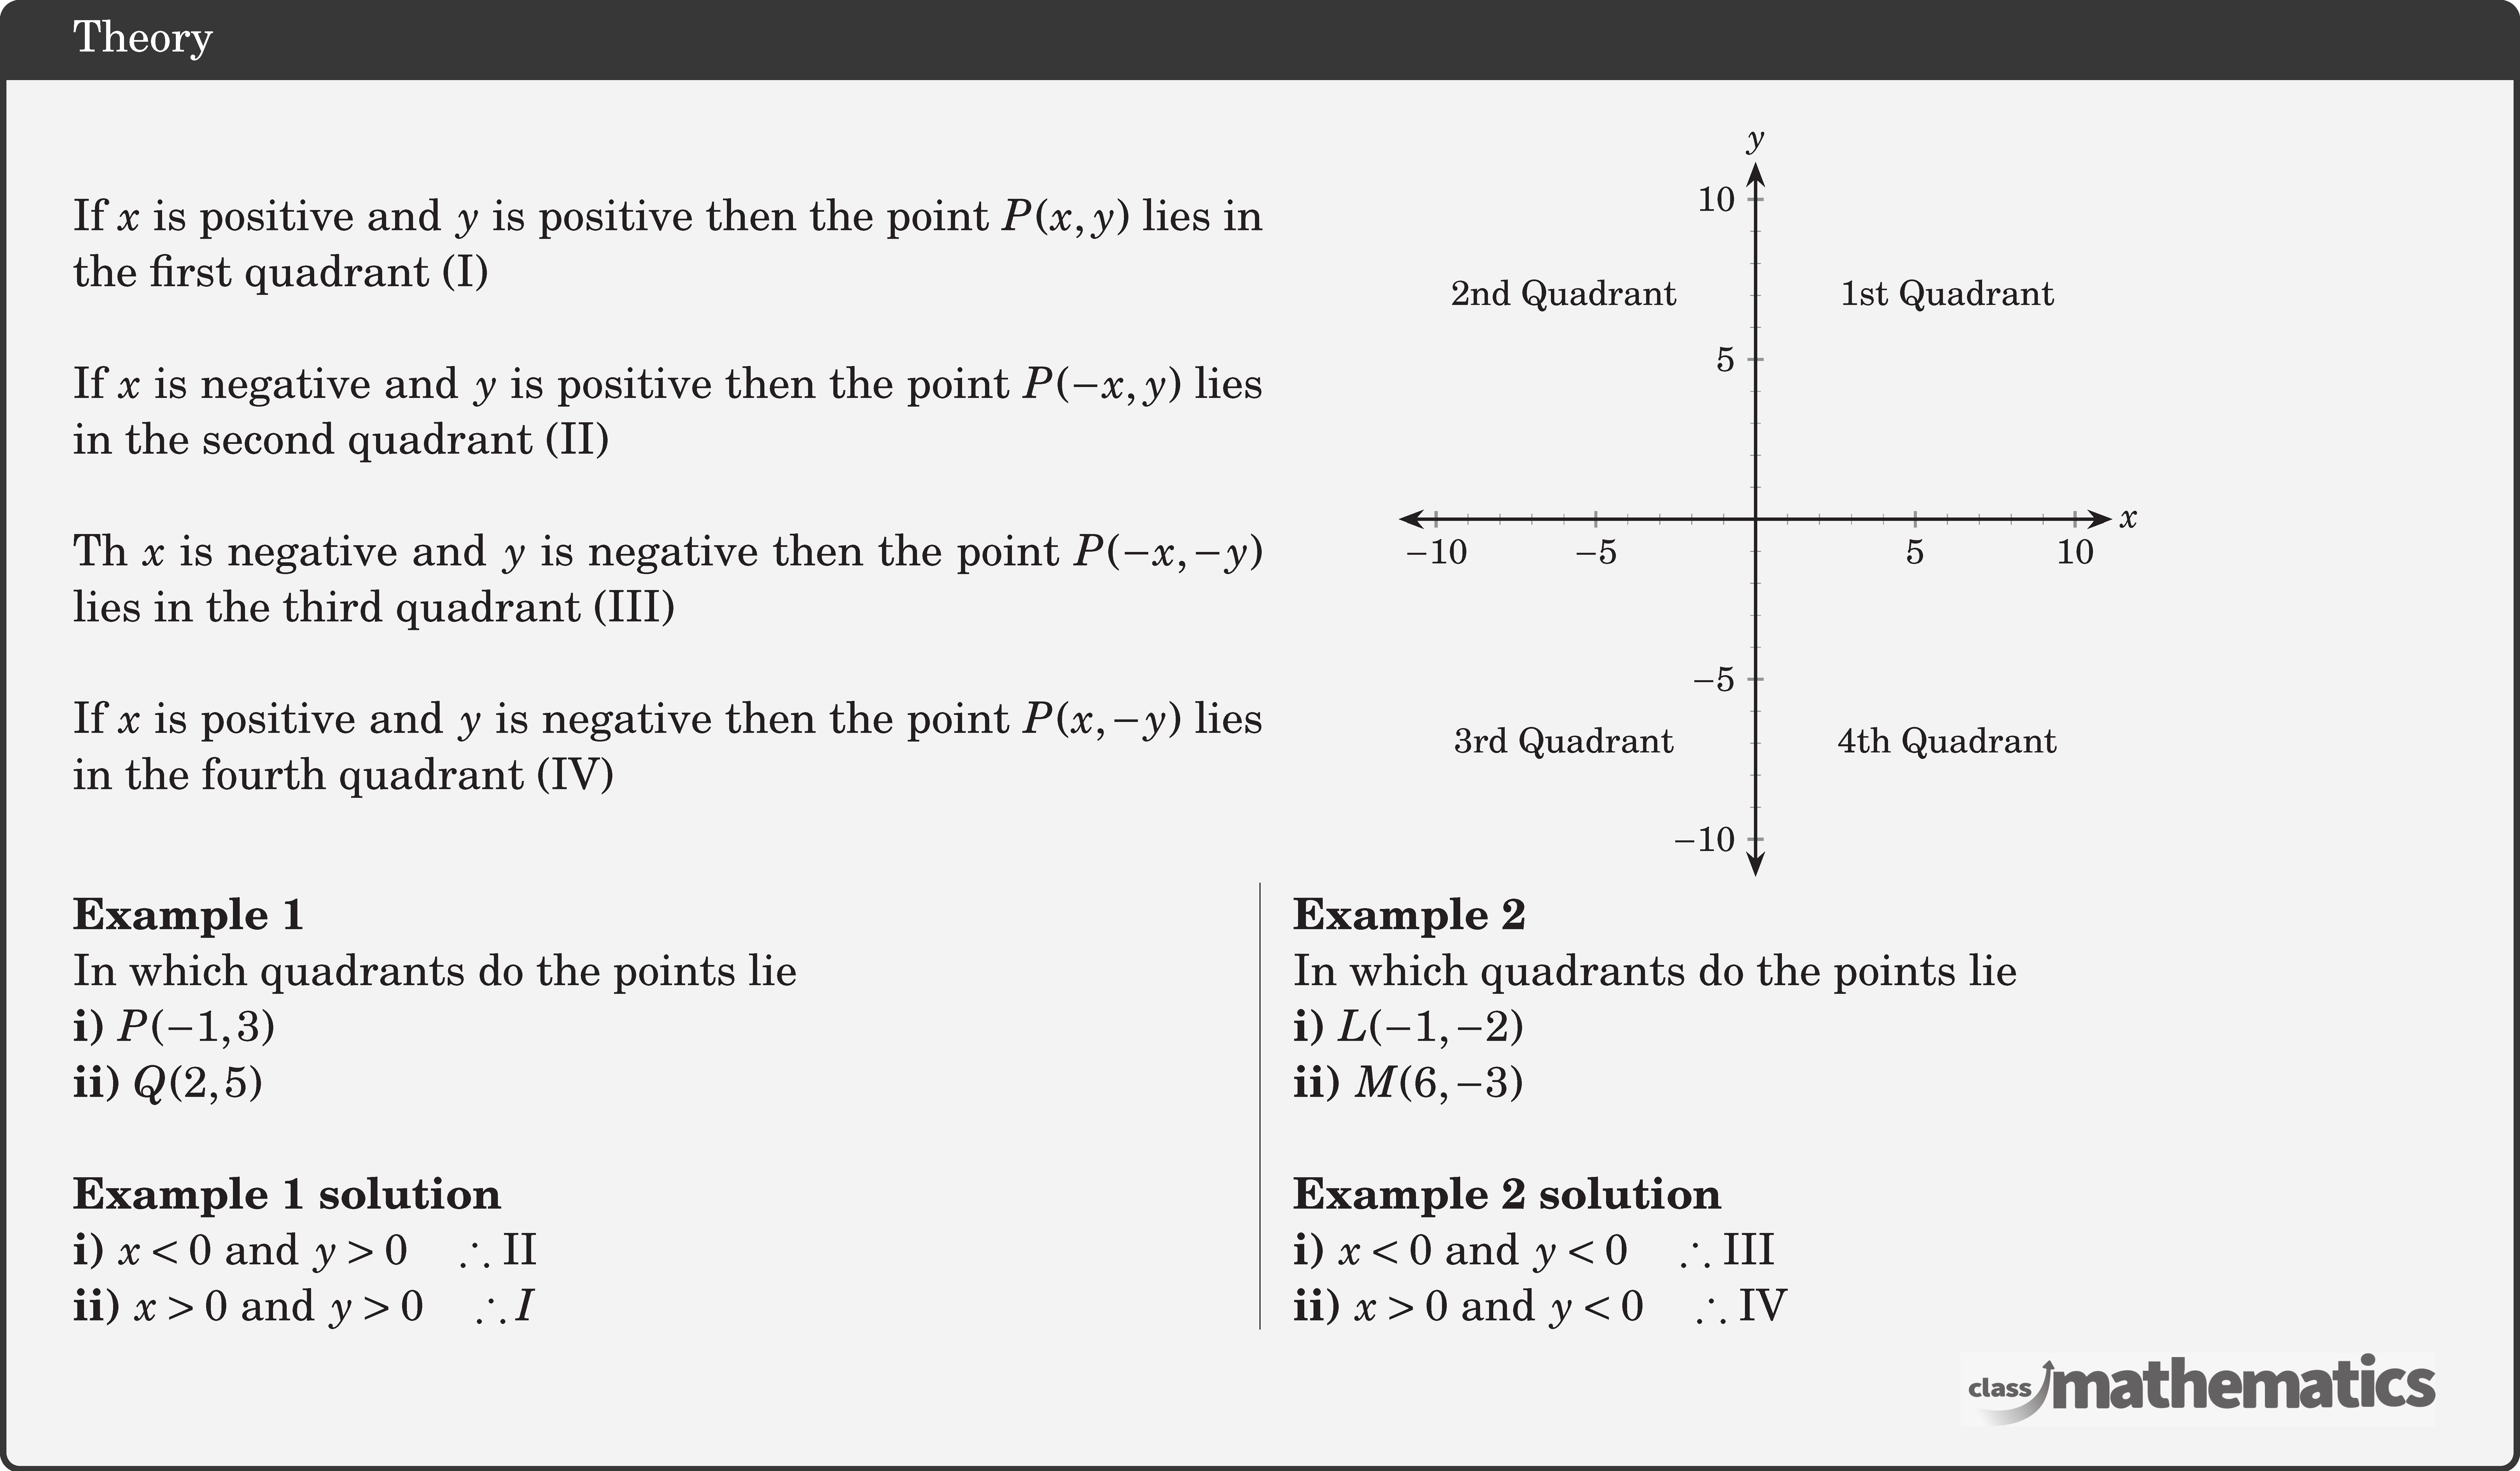 \begin{minipage}[c]{9cm} If \(x\) is positive and \(y\) is positive then the point \(P(x, y)\) lies in the first quadrant (I)\\  If \(x\) is negative and \(y\) is positive then the point \(P(-x, y)\) lies in the second quadrant (II)\\  Th \(x\) is negative and \(y\) is negative then the point \(P(-x,-y)\) lies in the third quadrant (III)\\  If \(x\) is positive and \(y\) is negative then the point \(P(x,-y)\) lies in the fourth quadrant (IV) \end{minipage}\qquad \quad  \begin{minipage}[c]{3cm} \begin{tikzpicture}[scale=0.8] \def \xmax{10} \def \xmin{-10} \def \ymax{10} \def \ymin{-10} \def \xlabel{x} \def \ylabel{y}  \begin{axis}[         axis lines=middle,     axis line style={shorten >=-10pt, shorten <=-10pt,very thick,Stealth-Stealth},         %grid=both, %major,         major grid style={line width=1pt,draw=black!70},         minor x tick num=4,         minor y tick num=4,         ylabel = $y$,         xlabel = $x$,         width=3in, height=3in,         ymin=\ymin, ymax=\ymax,         xmin=\xmin, xmax=\xmax,         axis on top=false,         axis line style = thick,         major tick style = thick,         xtick distance = 1, xlabel style={at={(ticklabel* cs:1.05)},anchor=west},         x grid style={thin, opacity=1},         ytick distance = 1, ylabel style={at={(ticklabel* cs:1.05)},anchor=south},         y grid style={thin, opacity=1},         axis on top=false,         minor xtick={-11,-10,...,10,11},         minor ytick={-11,-10,...,10,11},         xtick={-11,-10,-5,5,10,11},         ytick={-11,-10,-5,5,10,11},          nodes near coords style={         anchor=center,         inner sep=0,         color=black,         font=,},     ] \addplot[     color=red,     mark=*,      mark size=0,      only marks,     nodes near coords,     point meta=explicit symbolic,     visualization depends on={value \thisrow{label} \as \label},     ]     table[meta=label] {         x     y    label         -6    7    {2nd Quadrant}         6     7    {1st Quadrant}         -6   -7    {3rd Quadrant}         6    -7    {4th Quadrant}     }; \end{axis} \end{tikzpicture} \end{minipage}  \begin{multicols}{2}  \textbf{Example 1}\\ In which quadrants do the points lie\\ \textbf{i)} \(P(-1,3)\)\\ \textbf{ii)} \(Q(2,5)\)\\  \textbf{Example 1 solution}\\ \textbf{i)} \(x<0\) and \(y>0 \quad \therefore\) II\\ \textbf{ii)} \(x>0\) and \(y>0 \quad \therefore I\)  \columnbreak \textbf{Example 2}\\ In which quadrants do the points lie\\ \textbf{i)} \(L(-1,-2)\)\\ \textbf{ii)} \(M(6,-3)\)\\  \textbf{Example 2 solution}\\ \textbf{i)} \(x<0\) and \(y<0 \quad \therefore\) III\\ \textbf{ii)} \(x>0\) and \(y<0 \quad \therefore\) IV \end{multicols}